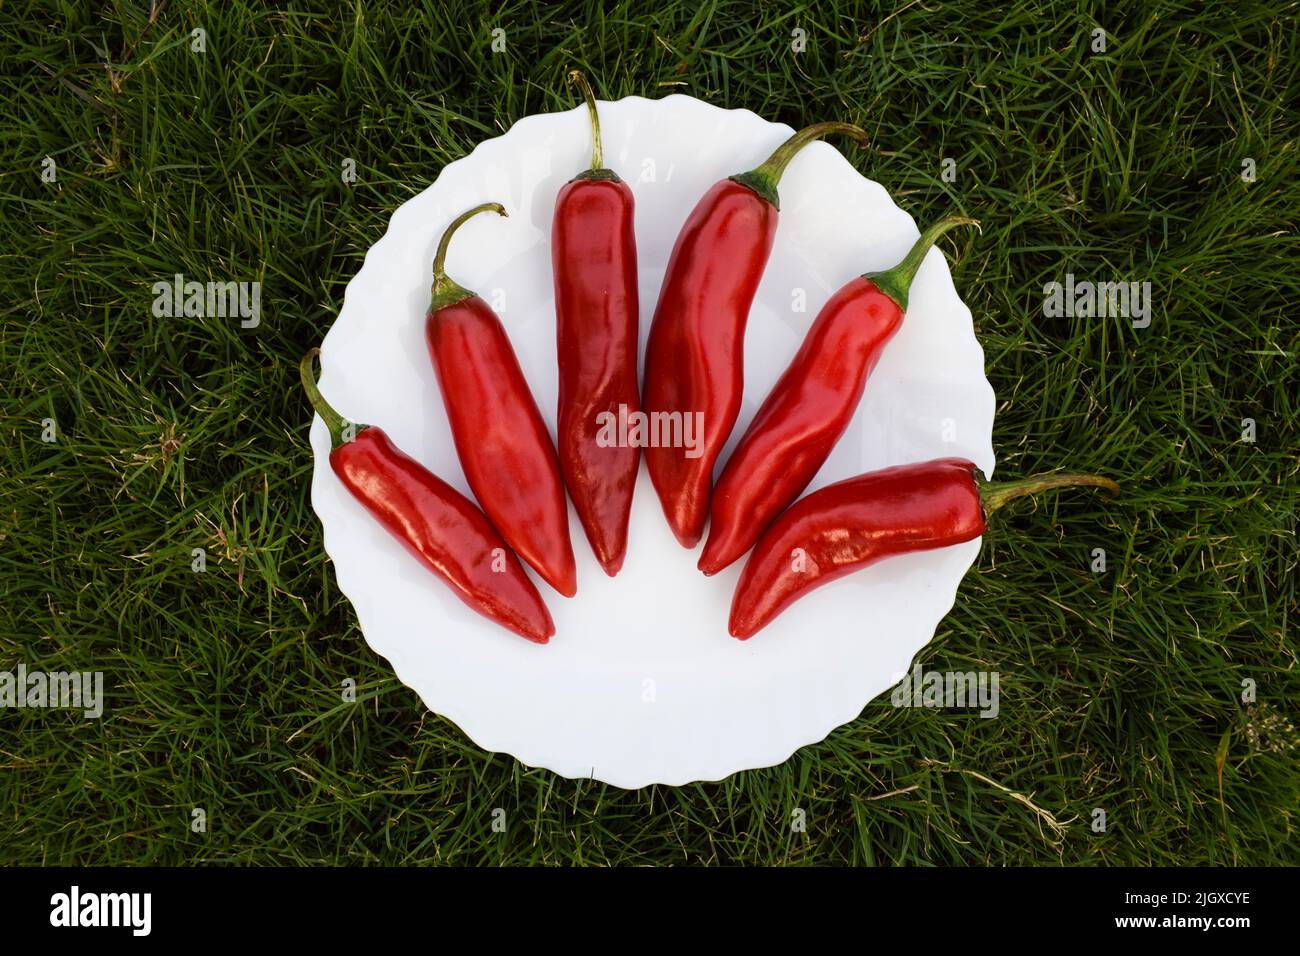 Ripe chili pepper in white plate with natural grass background. Cayenne pepper, thick skin pepper Stock Photo